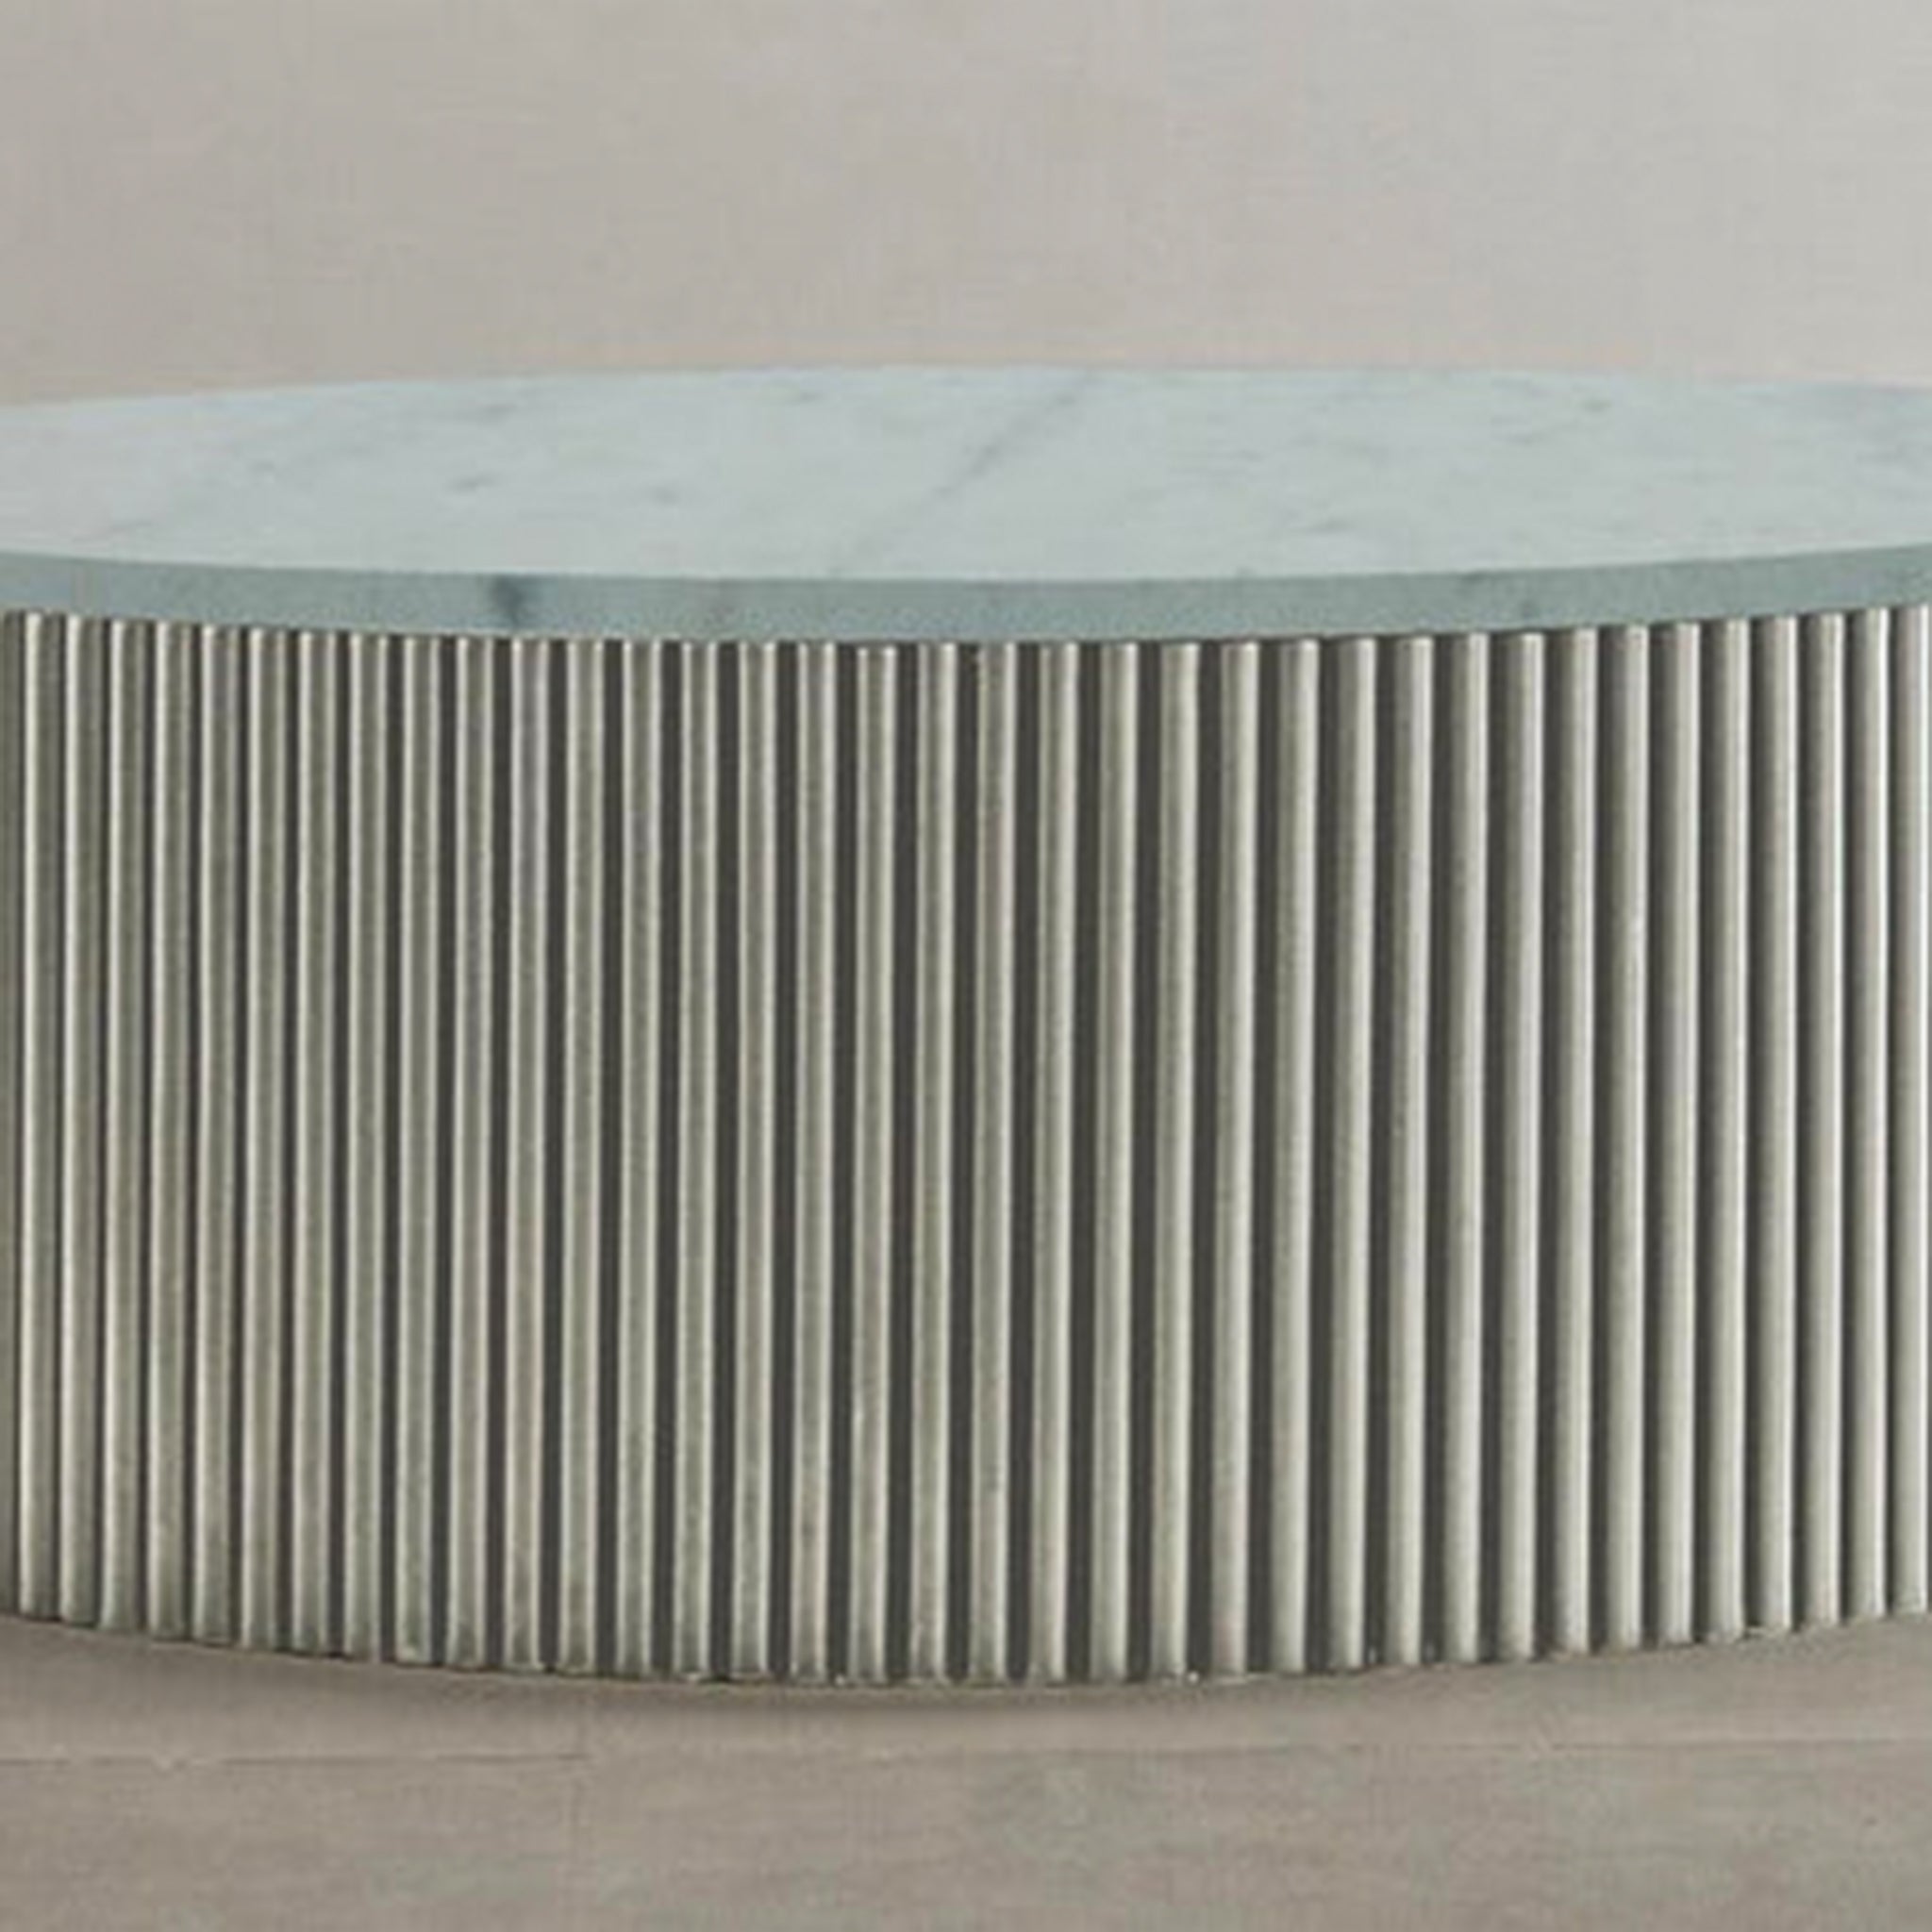 "Stylish ribbed coffee table with circular design"